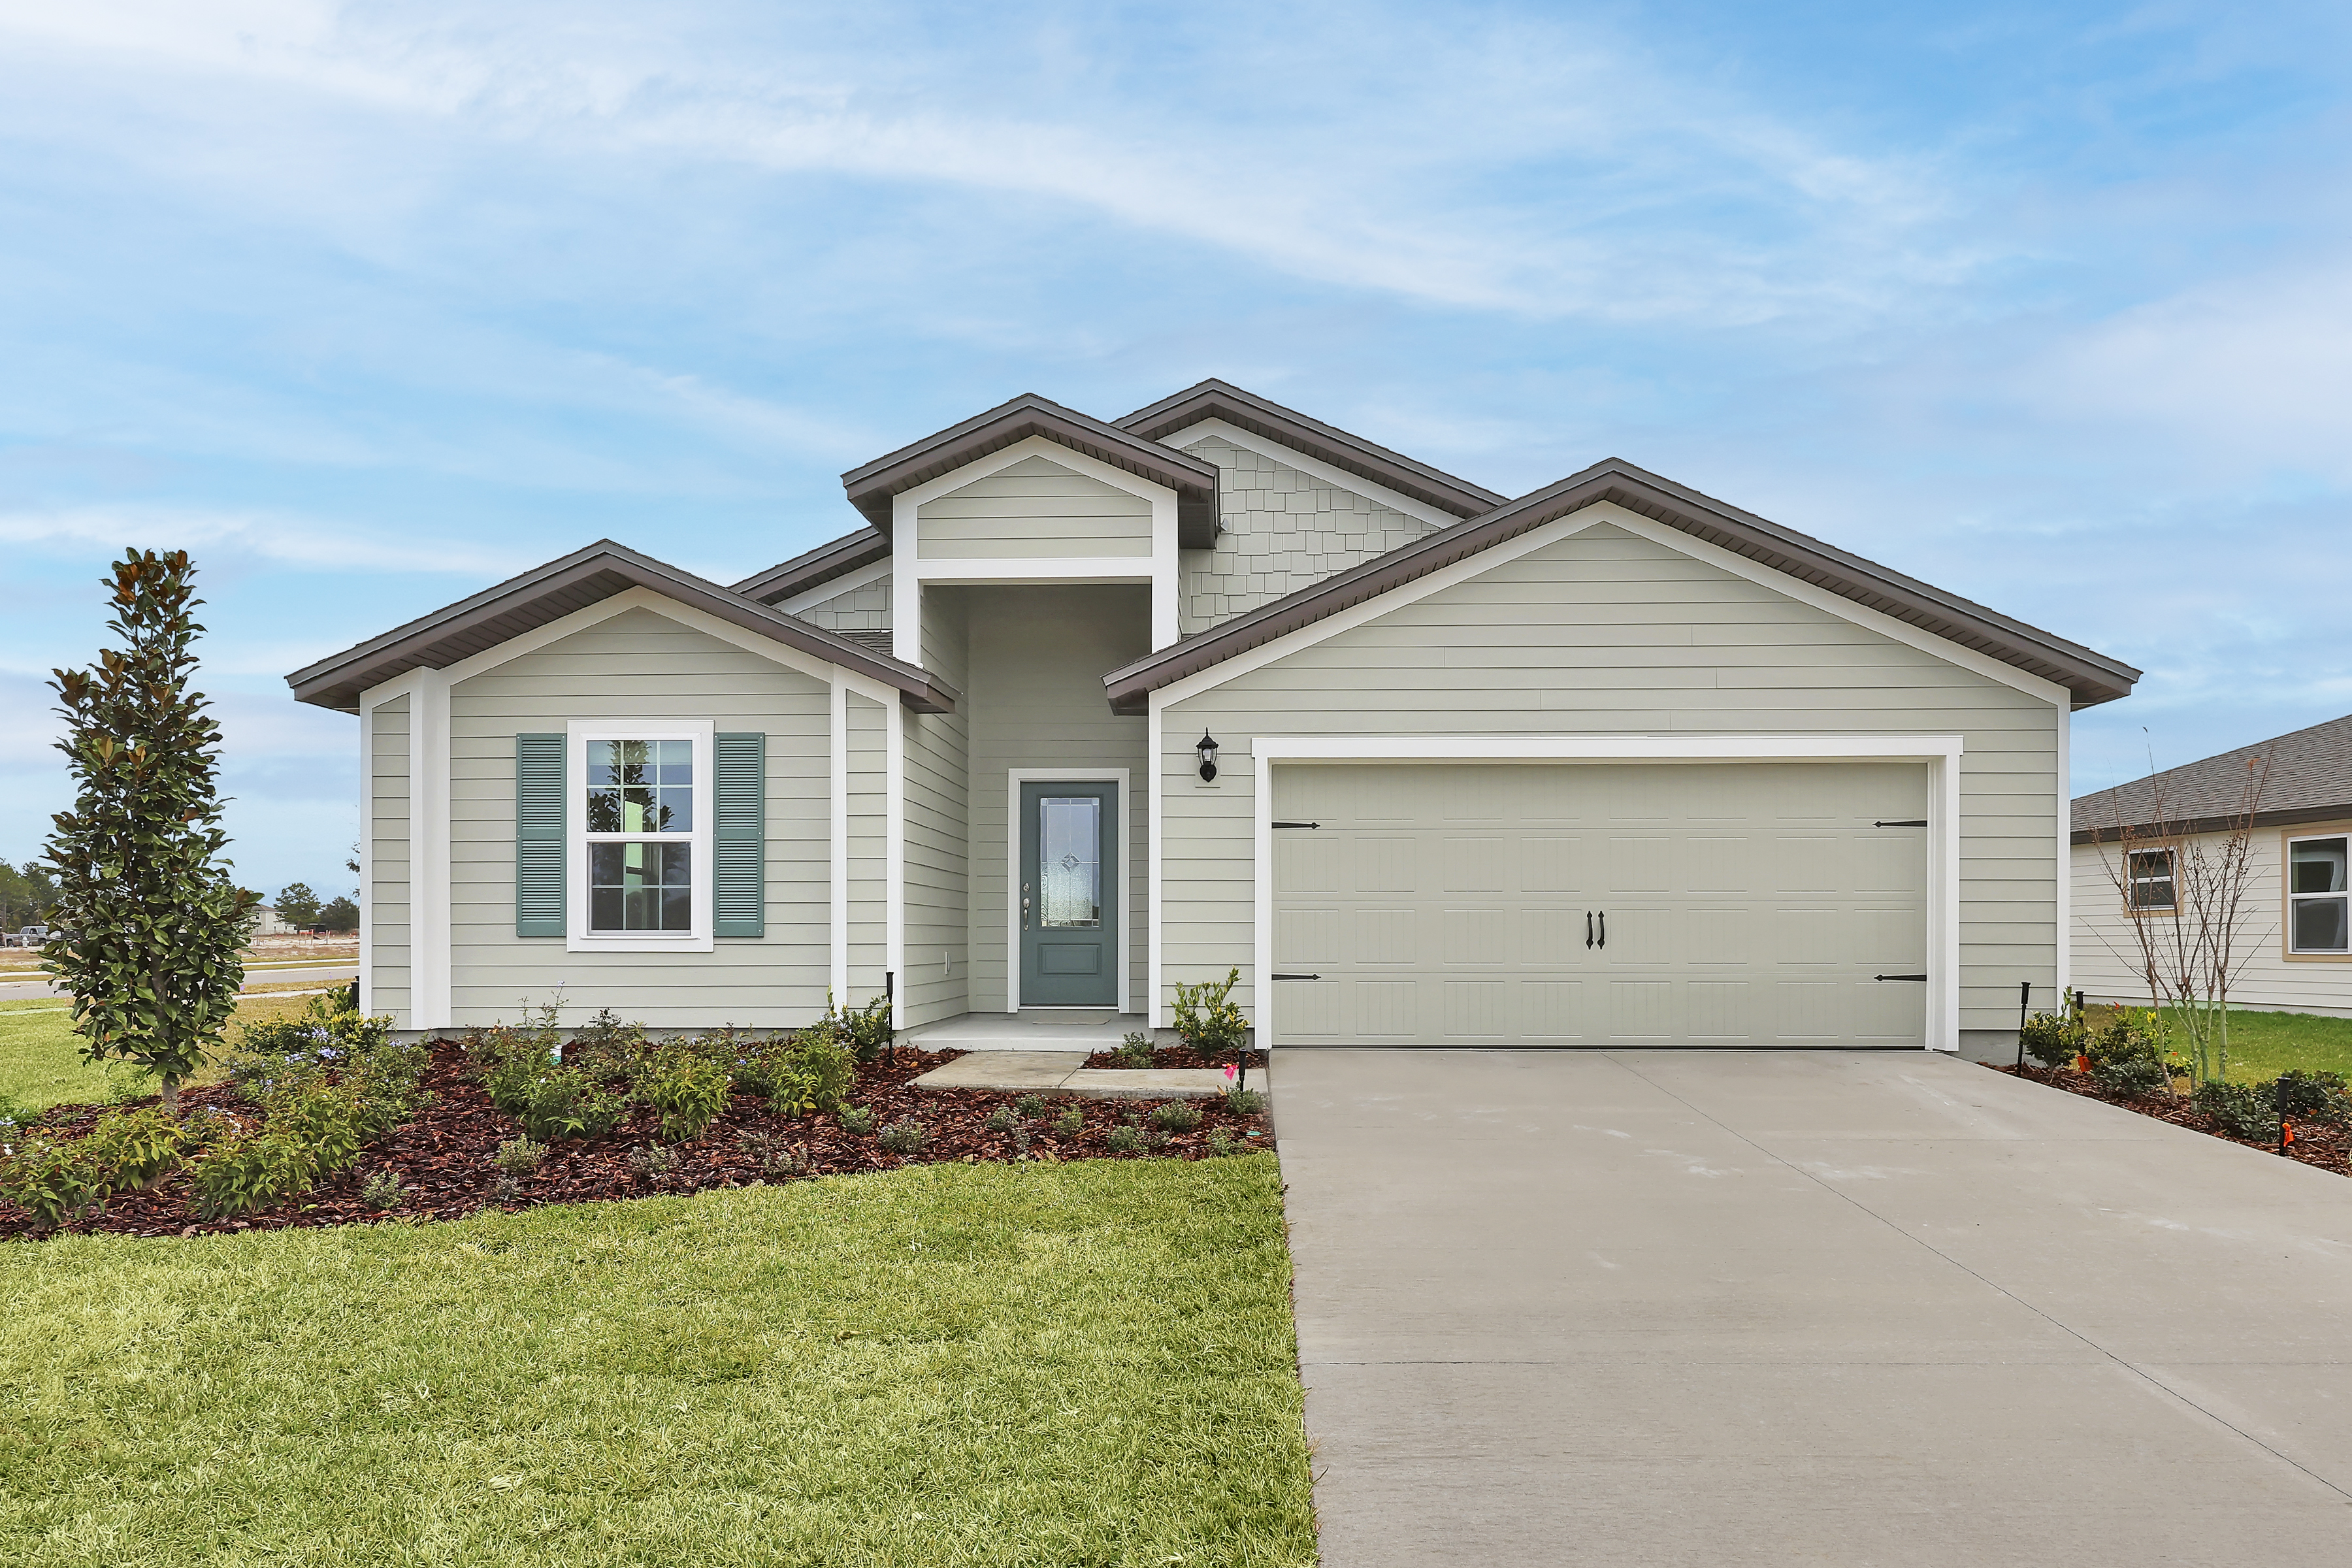 Photograph of the one-story Hillcrest plan by LGI Homes in gray and sage green siding with white trim.